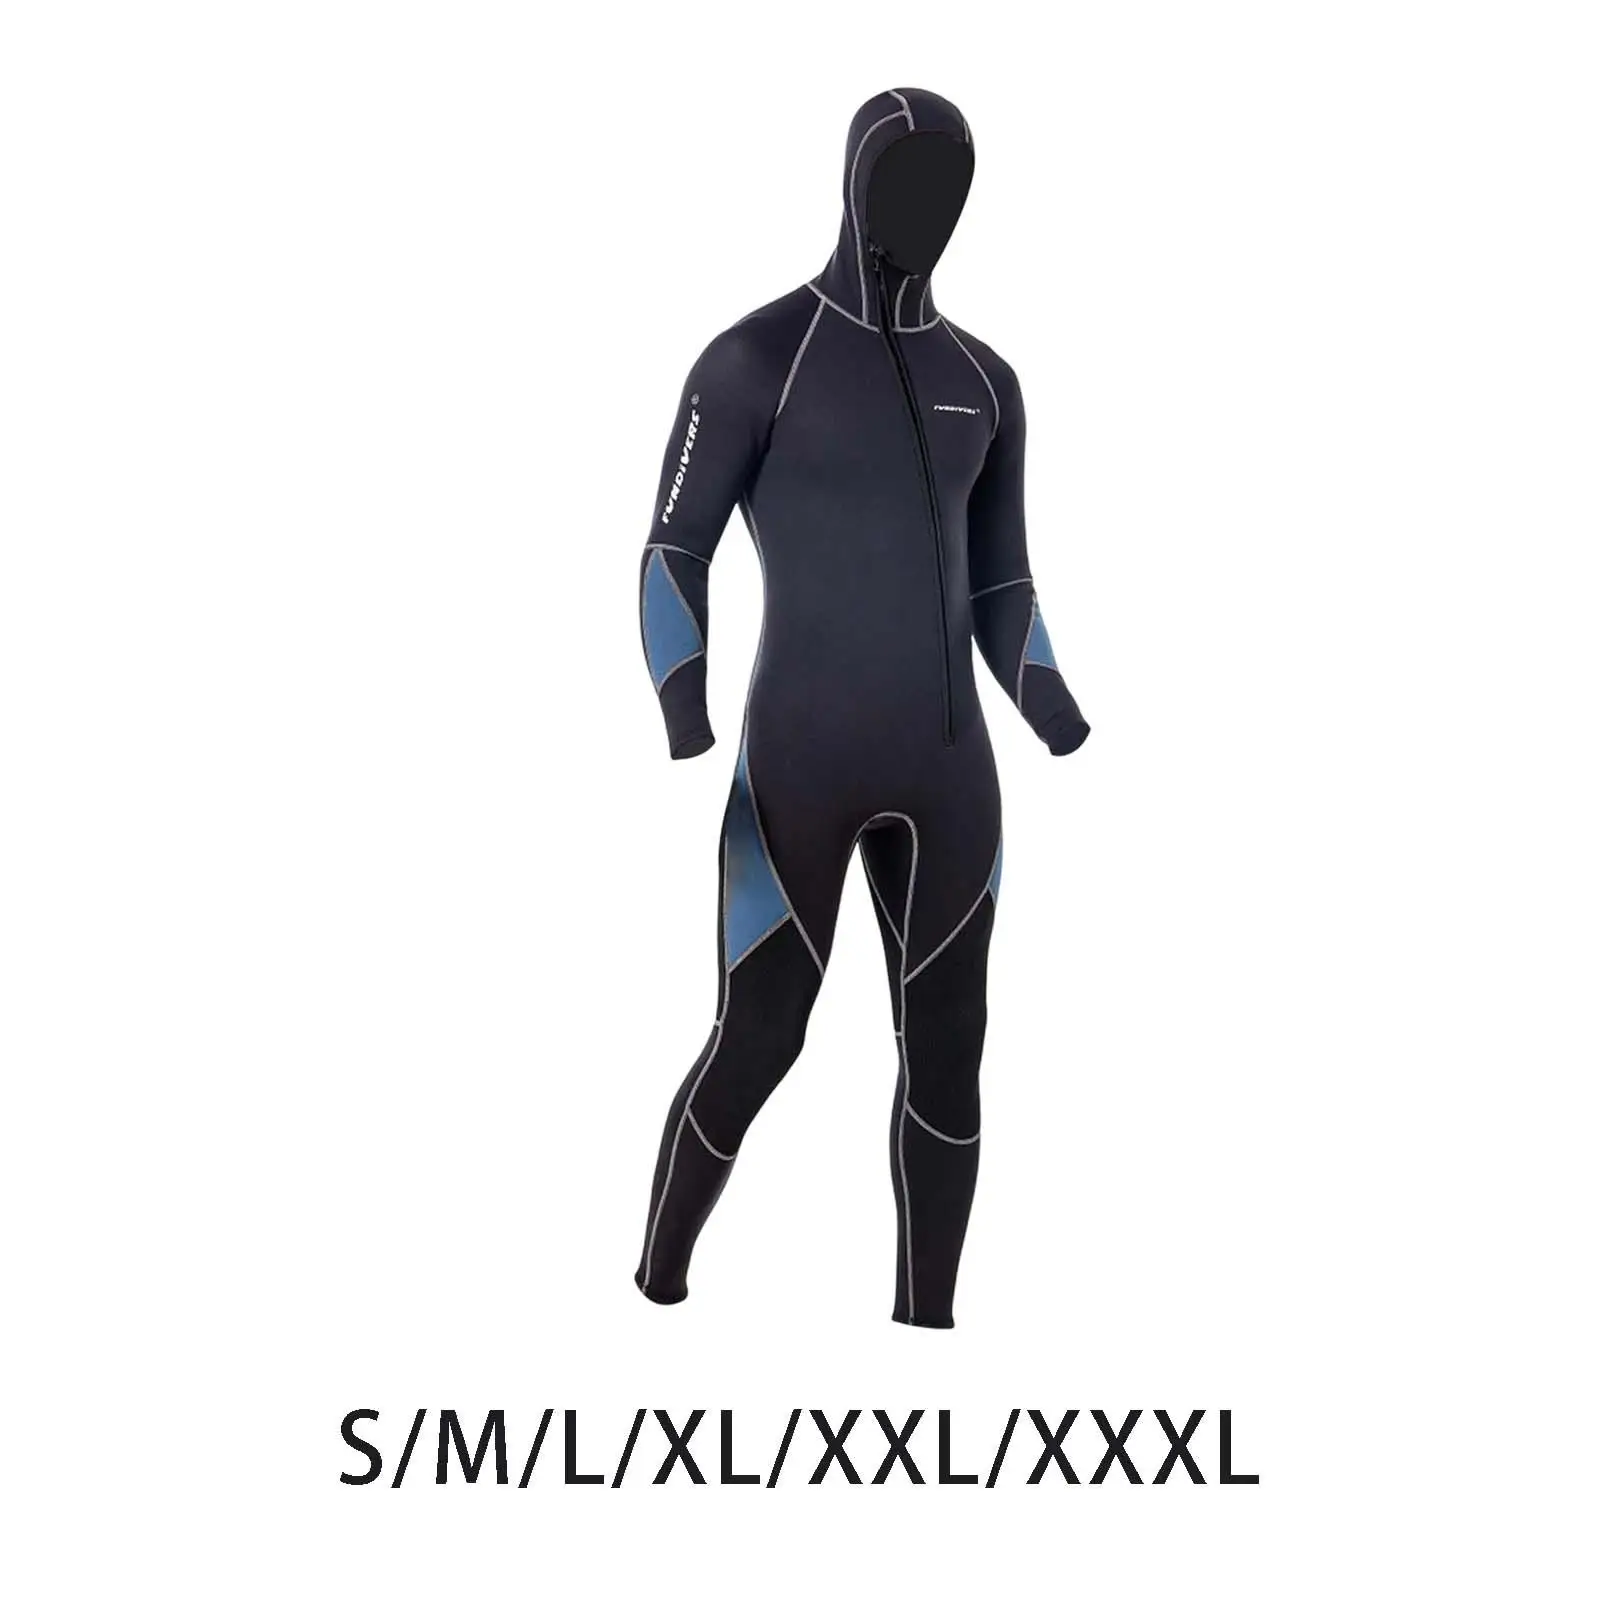 shopsuntek Full Body Wetsuit Gray Protective Comfortable 3mm Hooded Wetsuit for